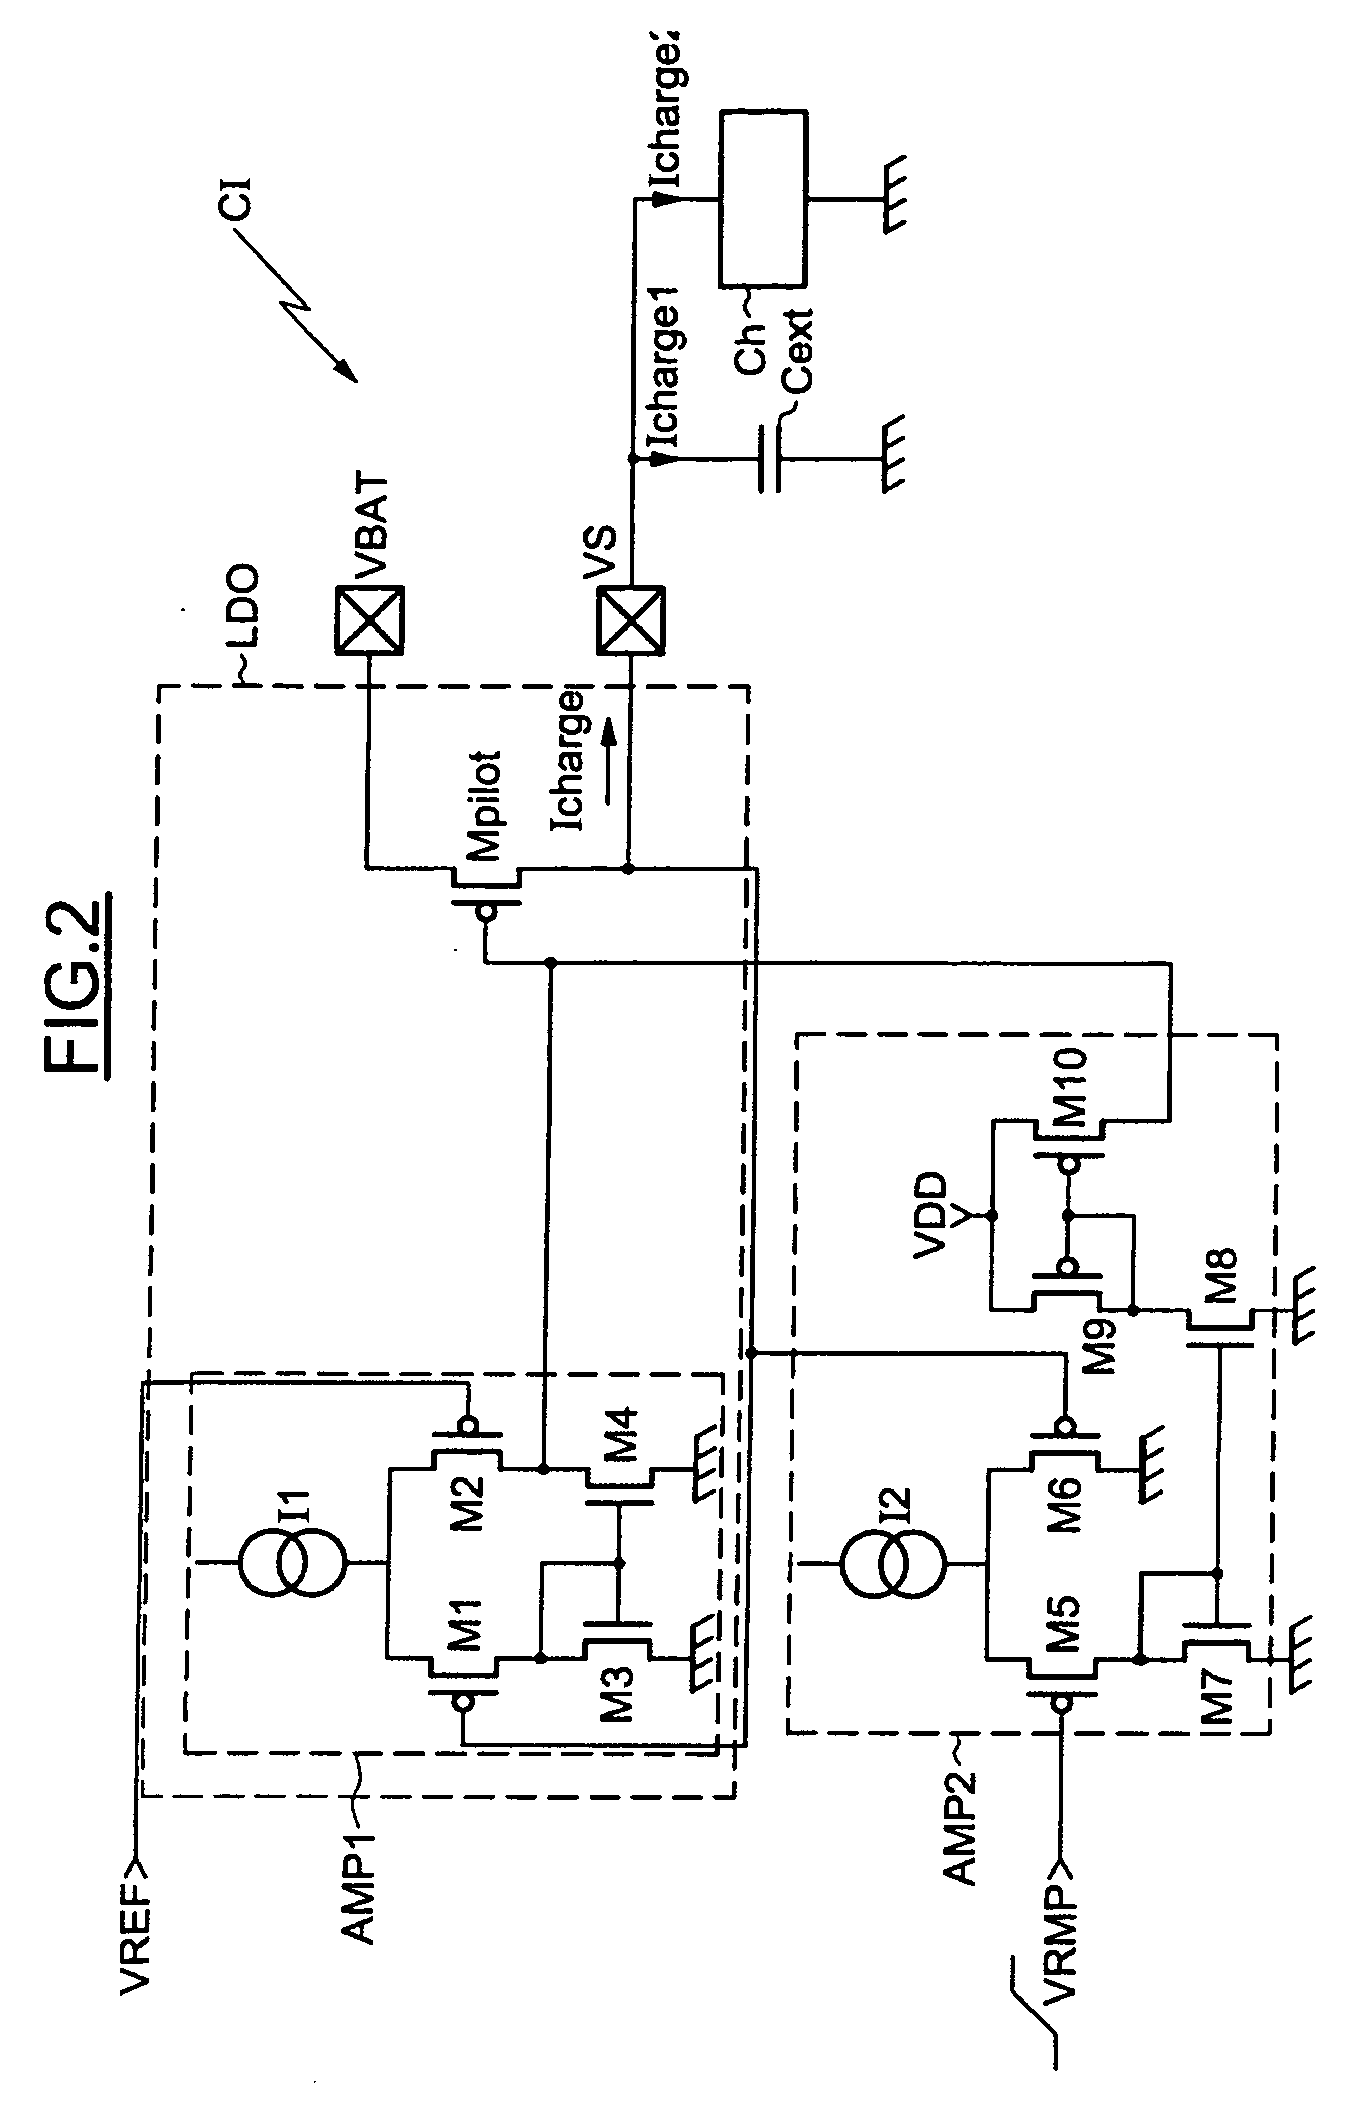 Method for controlling the operation of a low-dropout voltage regulator and corresponding integrated circuit